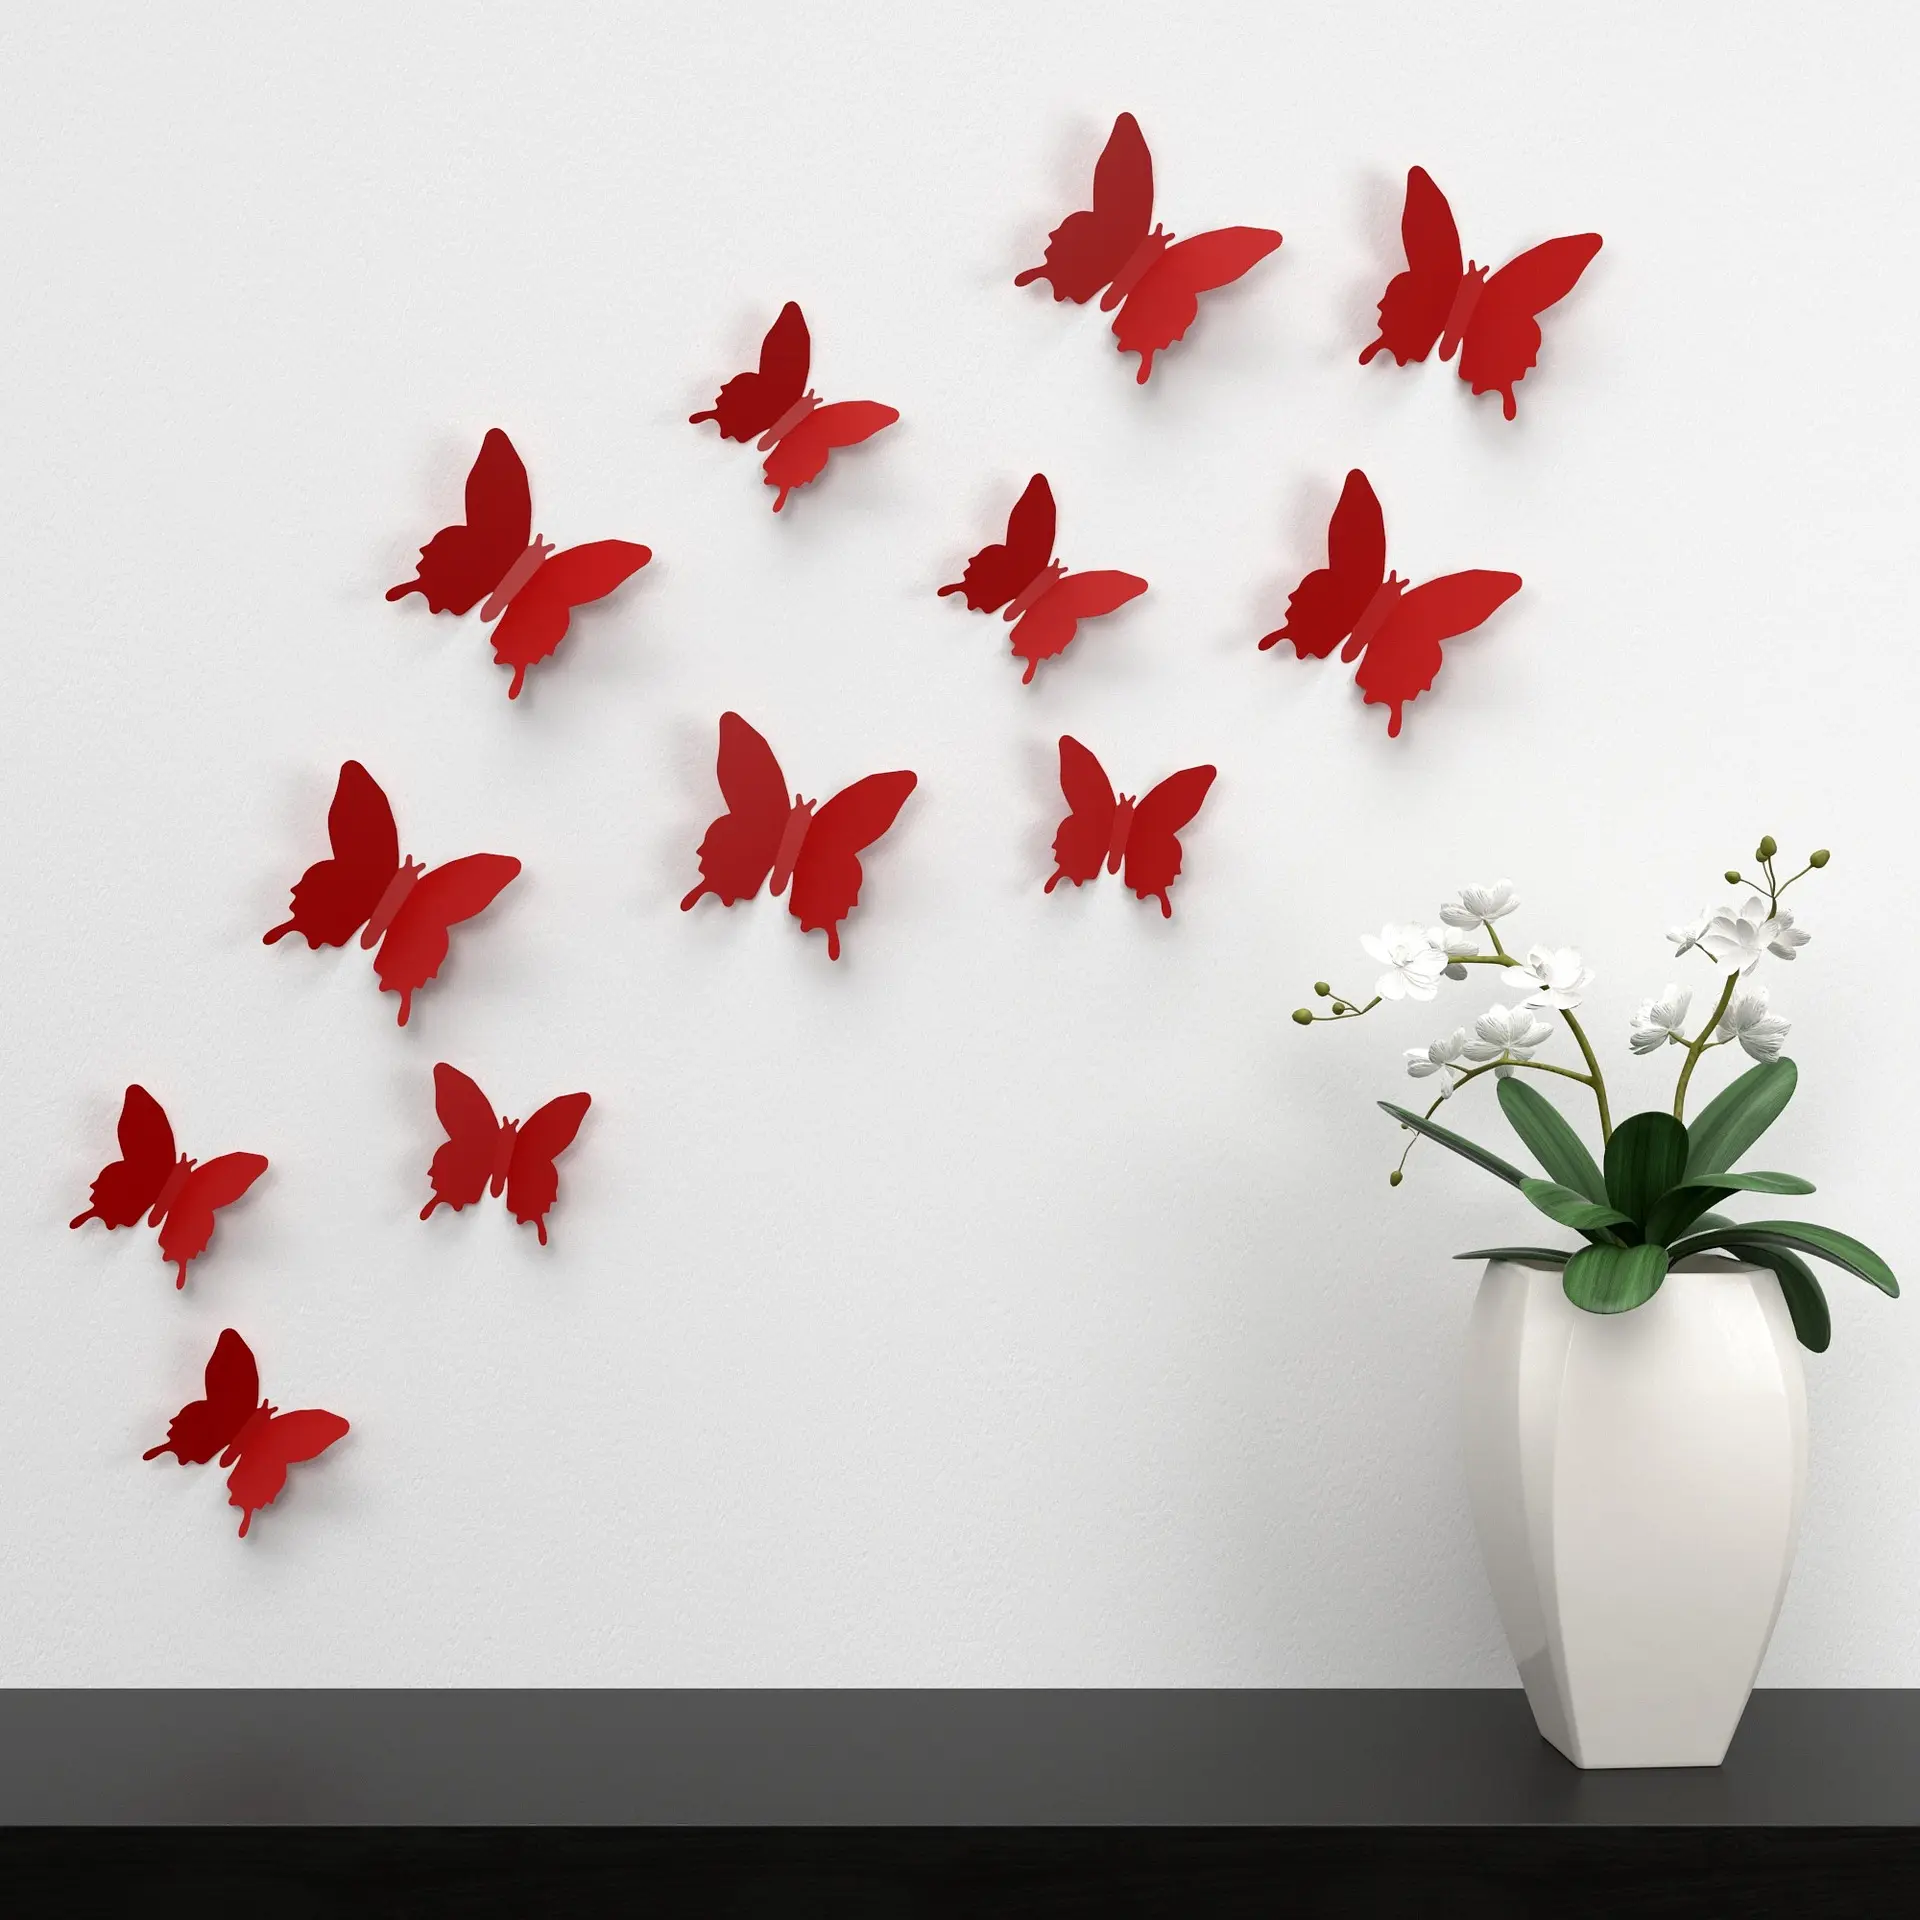 3D Paper Butterfly Wall Stickers Removable Butterflies Decor Butterfly Wall Decals For Living Room Home Nursery Girls Bedroom